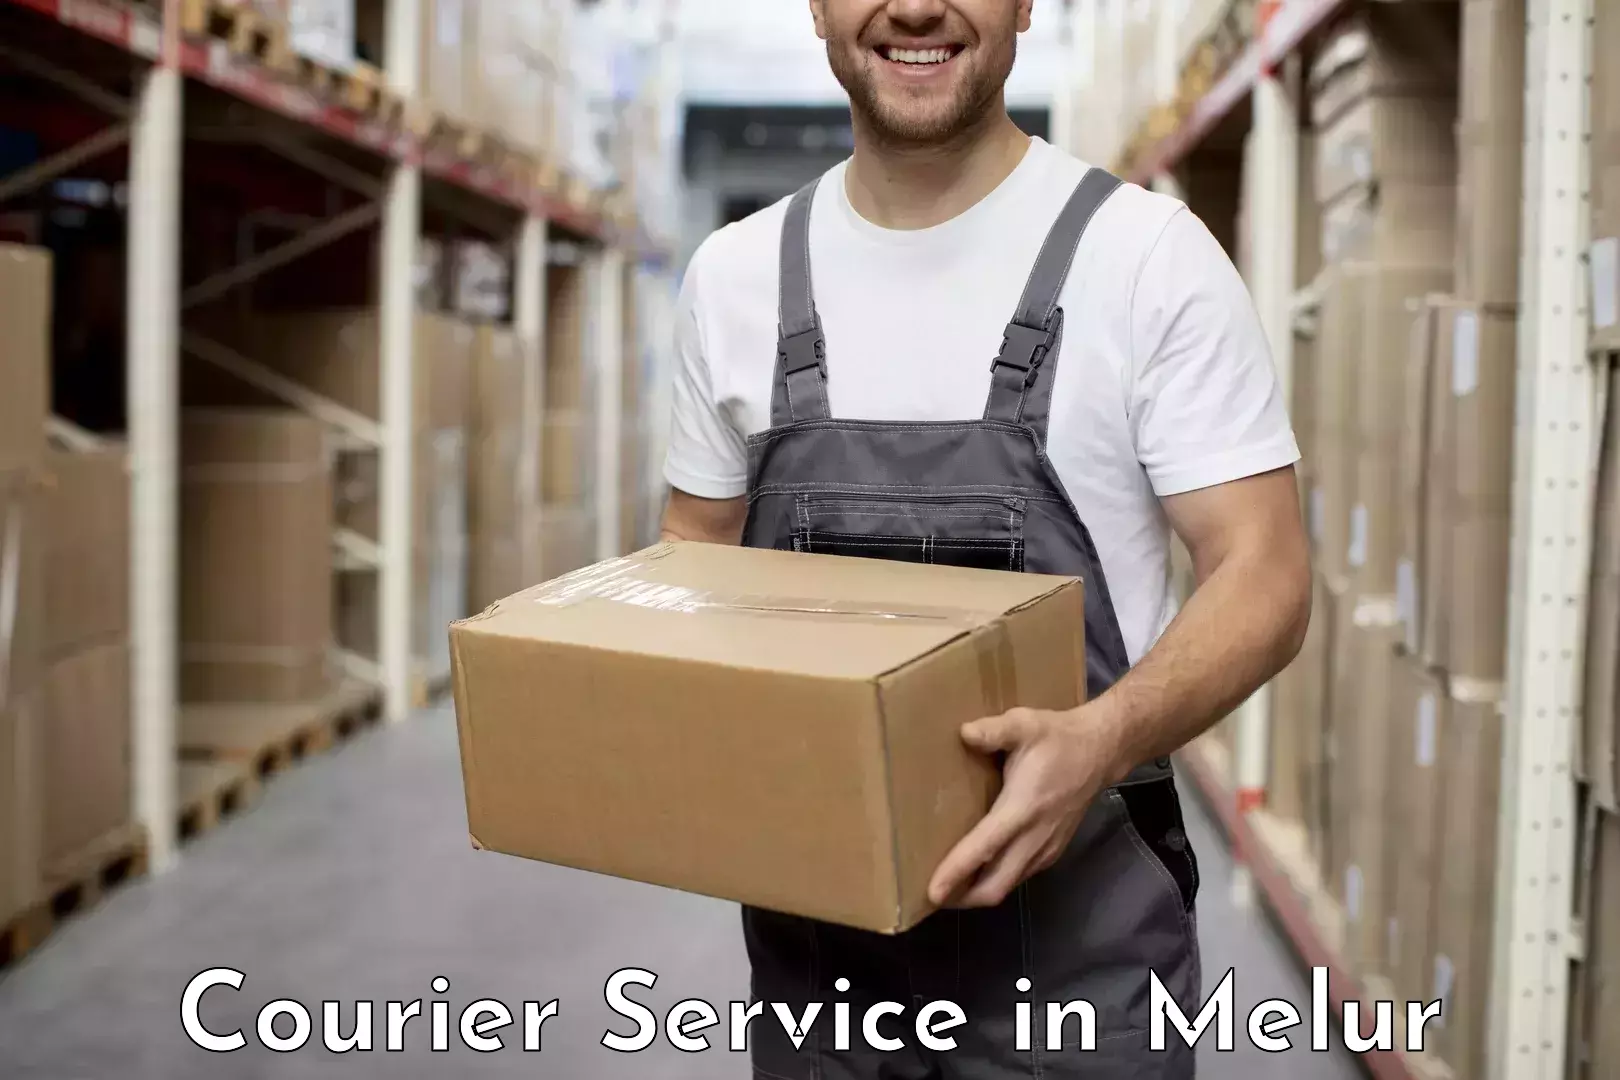 Domestic delivery options in Melur